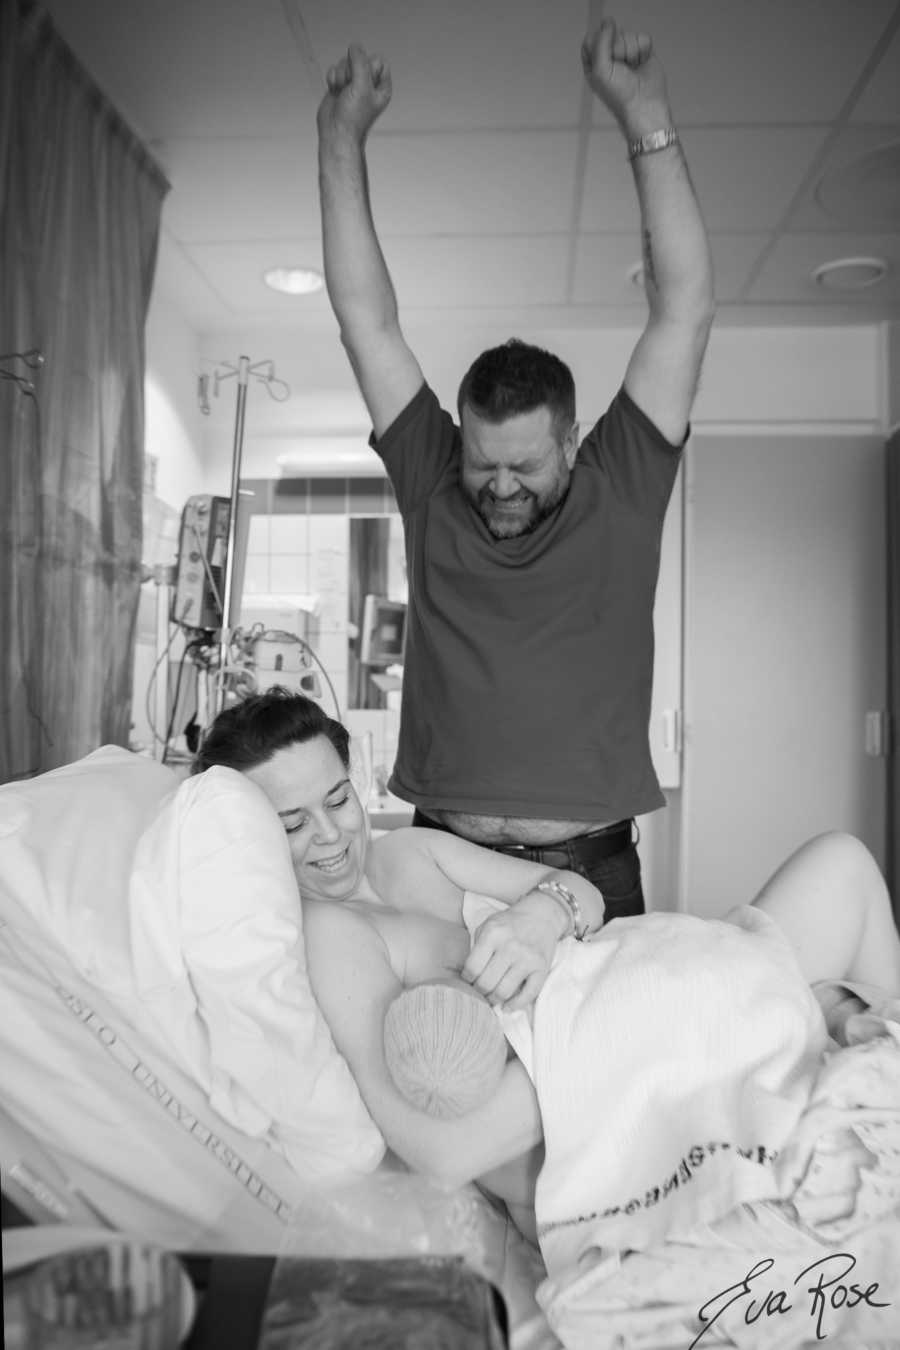 Husband stands with arms in air beside wife who is in hospital bed breastfeeding